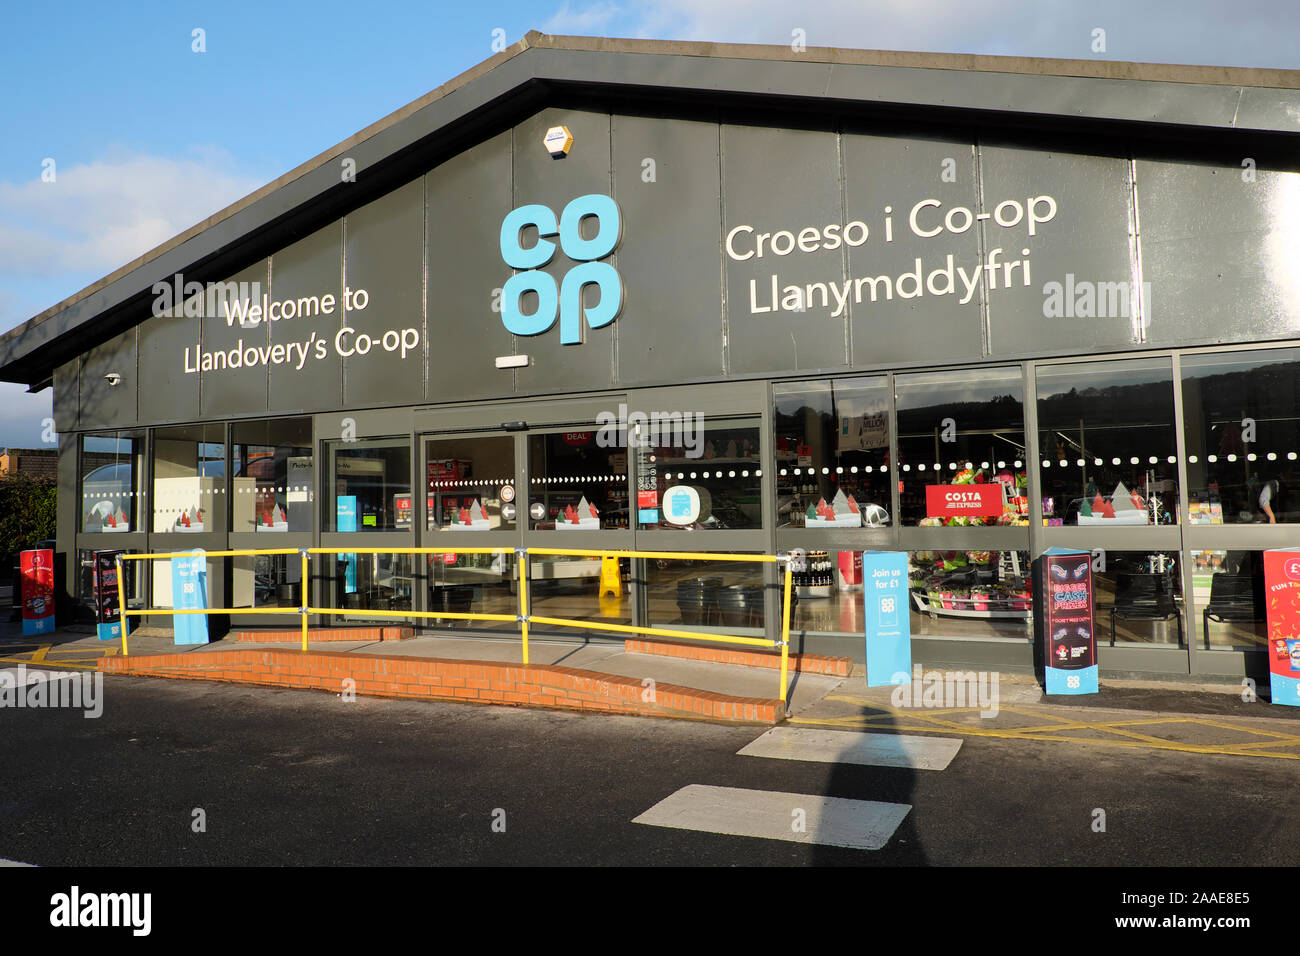 Co-Op supermarket store exterior entrance with bilingual Welsh English sign in Llandovery LLanymddyfri, Carmarthenshire Wales UK . KATHY DEWITT Stock Photo